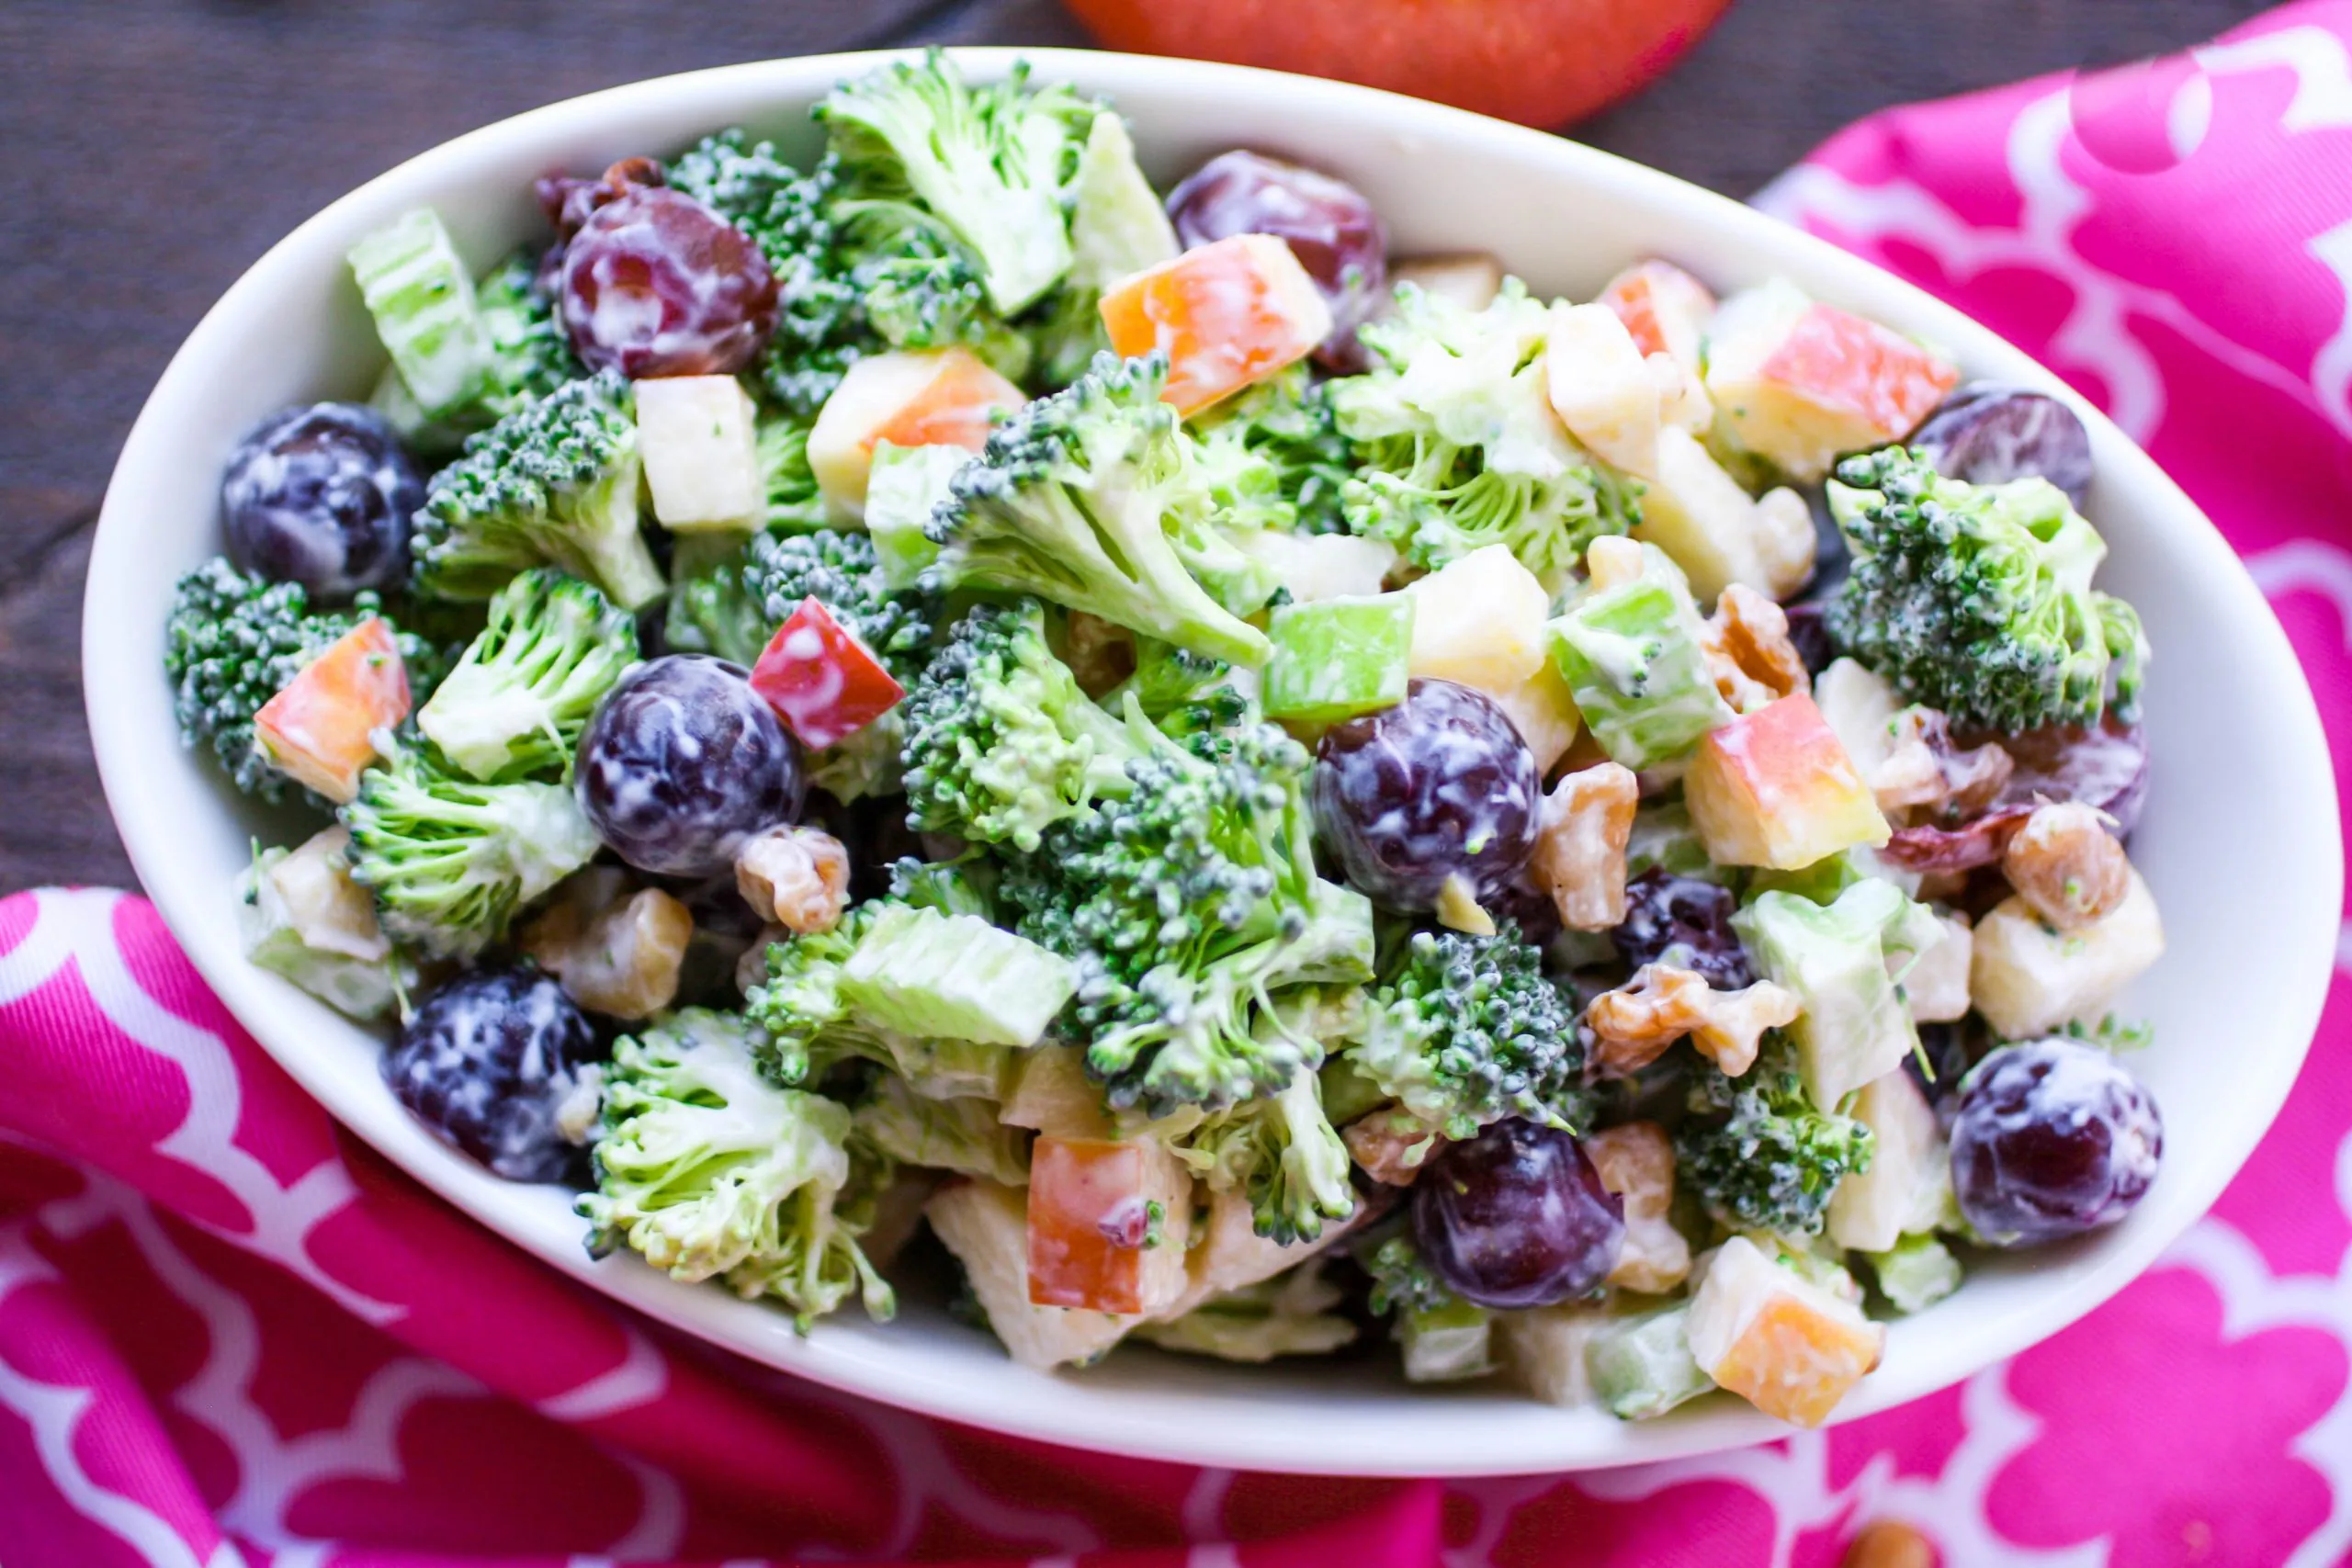 Check out all the goodies in this Broccoli Waldorf Salad!